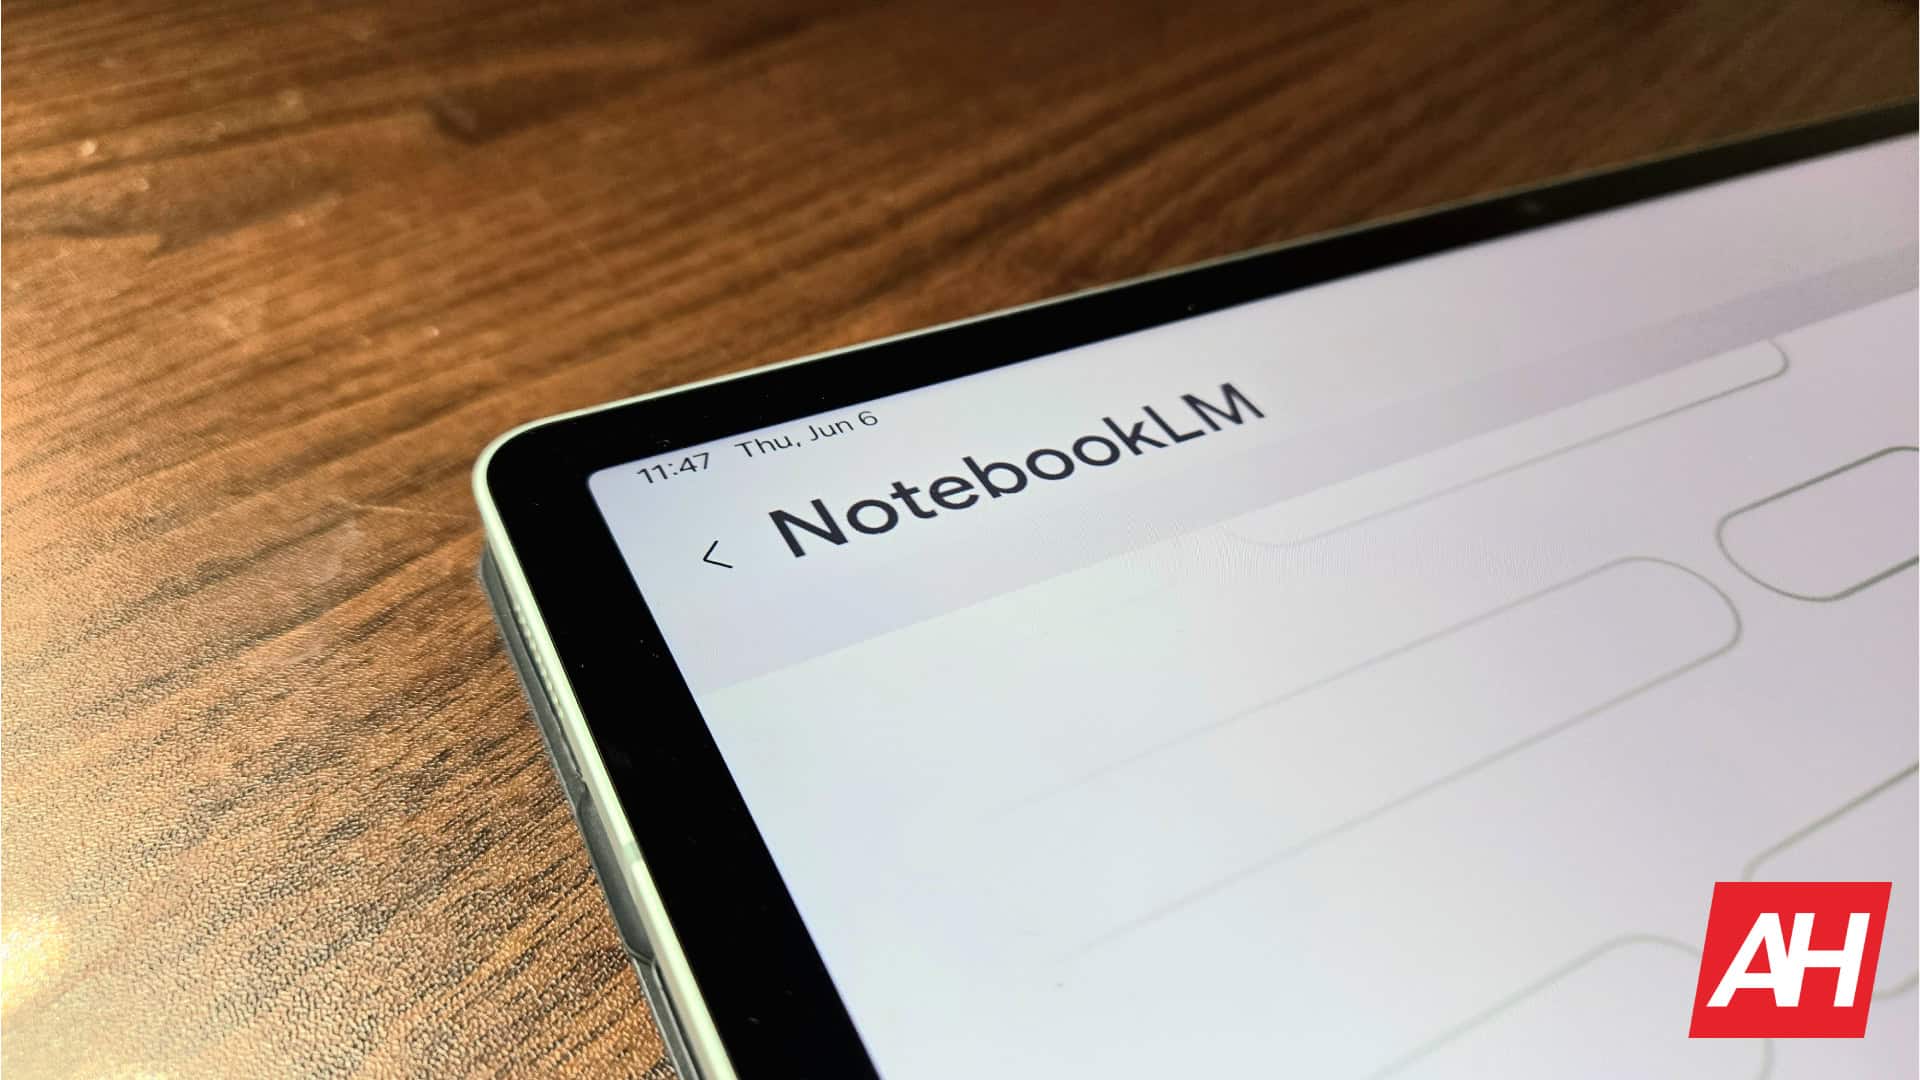 NotebookLM gains Gemini 1.5 Pro, goes global with more features